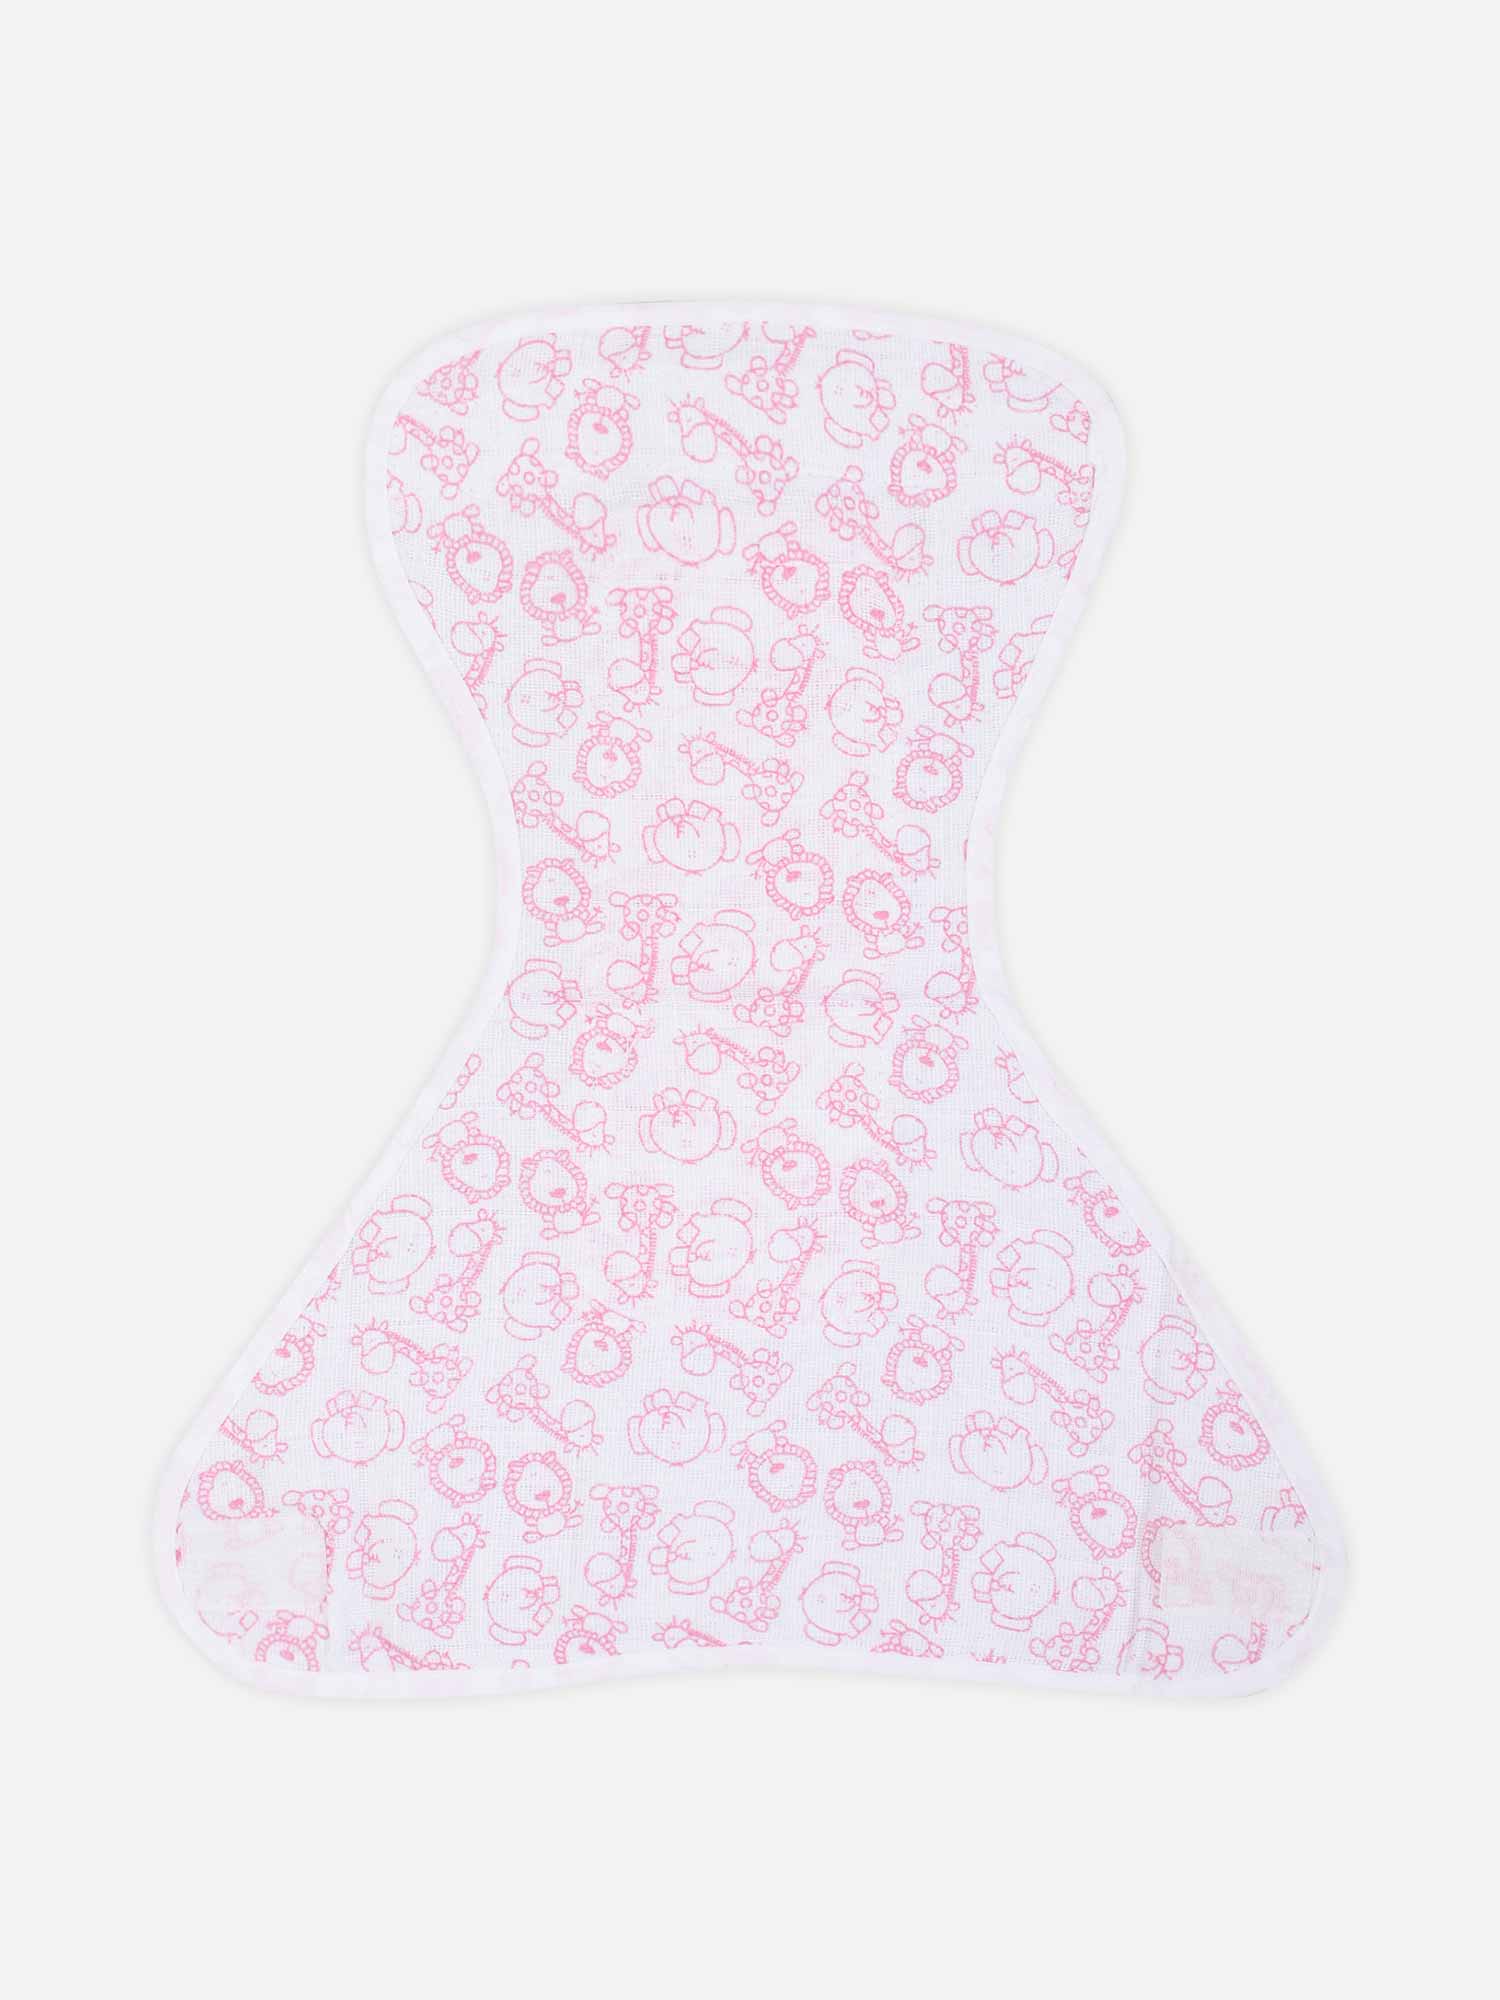 Oh Baby Printed Velcro Nappies Pink - Ltpr